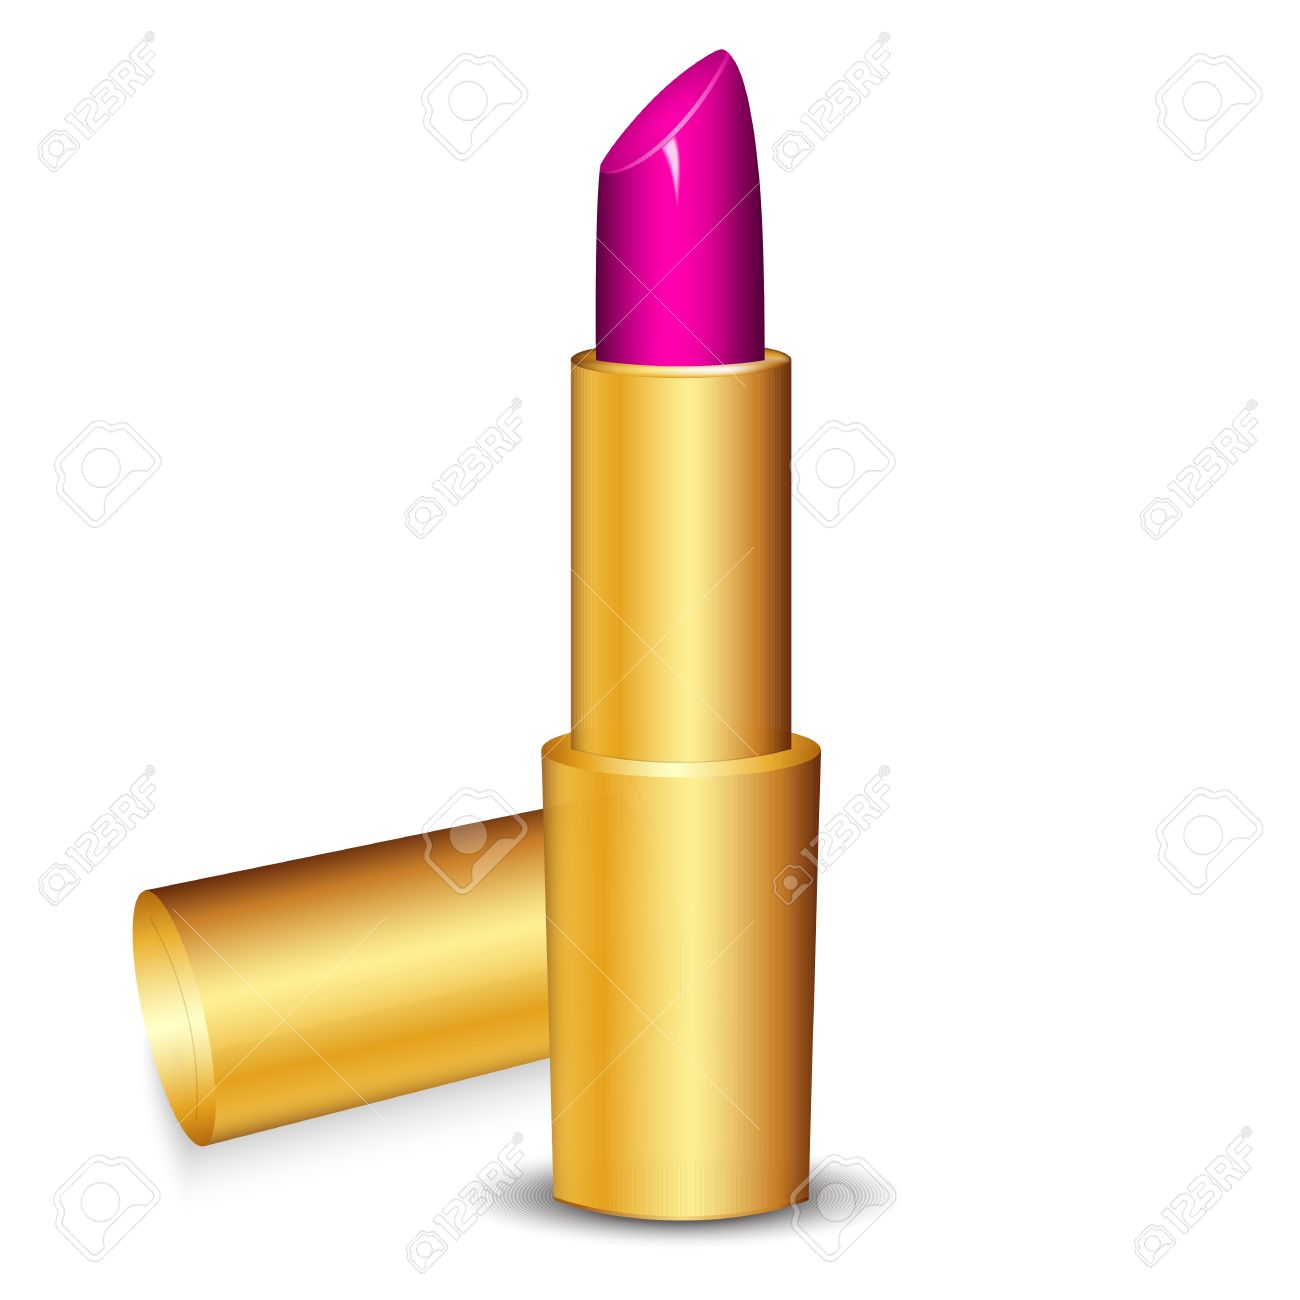 Lipstick clipart #8, Download drawings